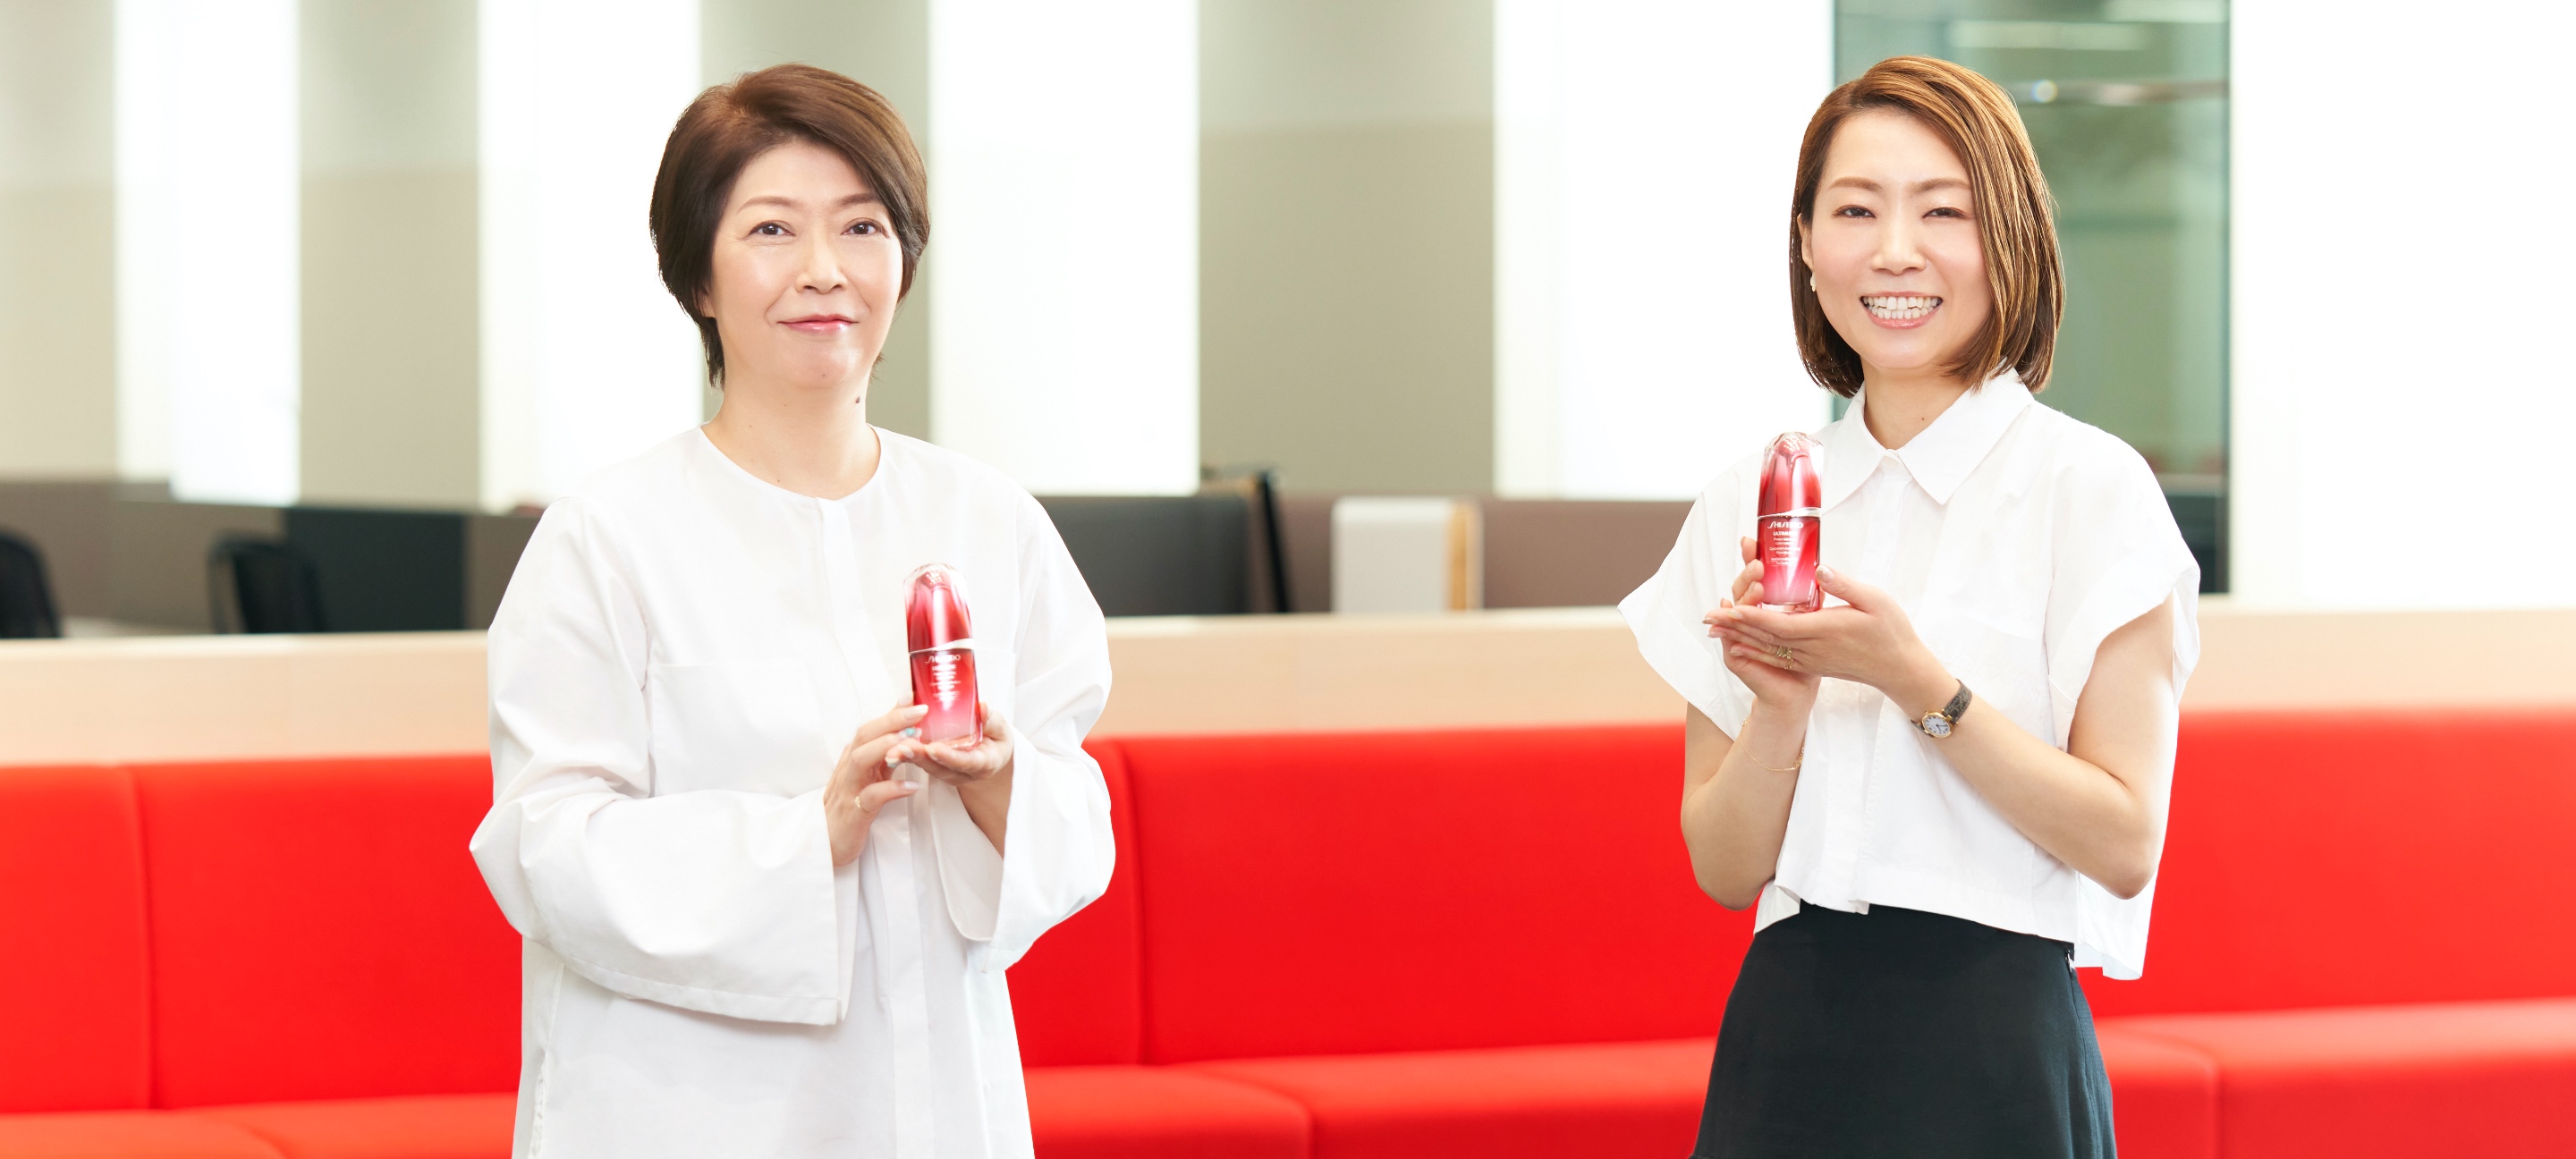 Our wish is to bring out the natural beauty and power of skin, and support the will to make the world better ~Thoughts on the renewal of ULTIMUNE, Brand SHISEIDO's iconic serum~